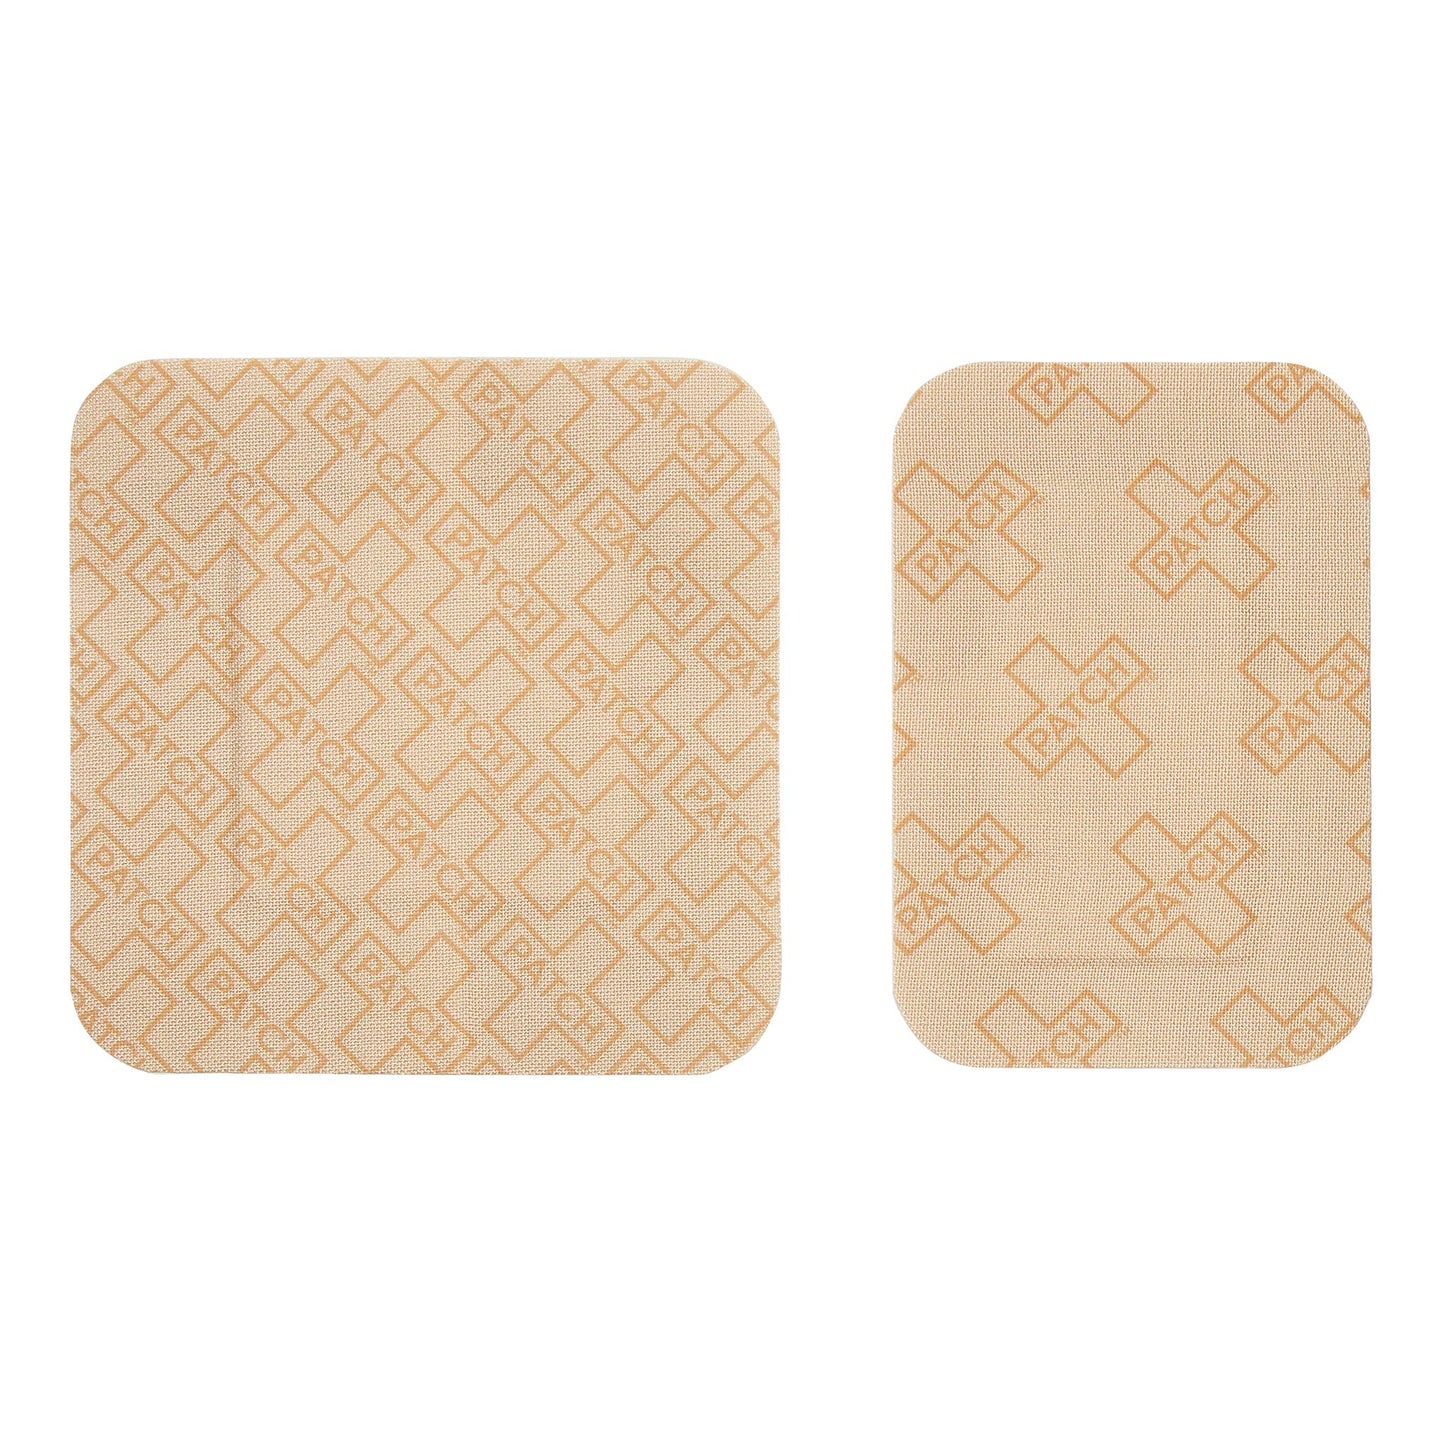 
                  
                    Patch Natural Bamboo Bandages for sensitive skin, eco friendly, hypoallergenic, non-toxic, latex free, large format
                  
                